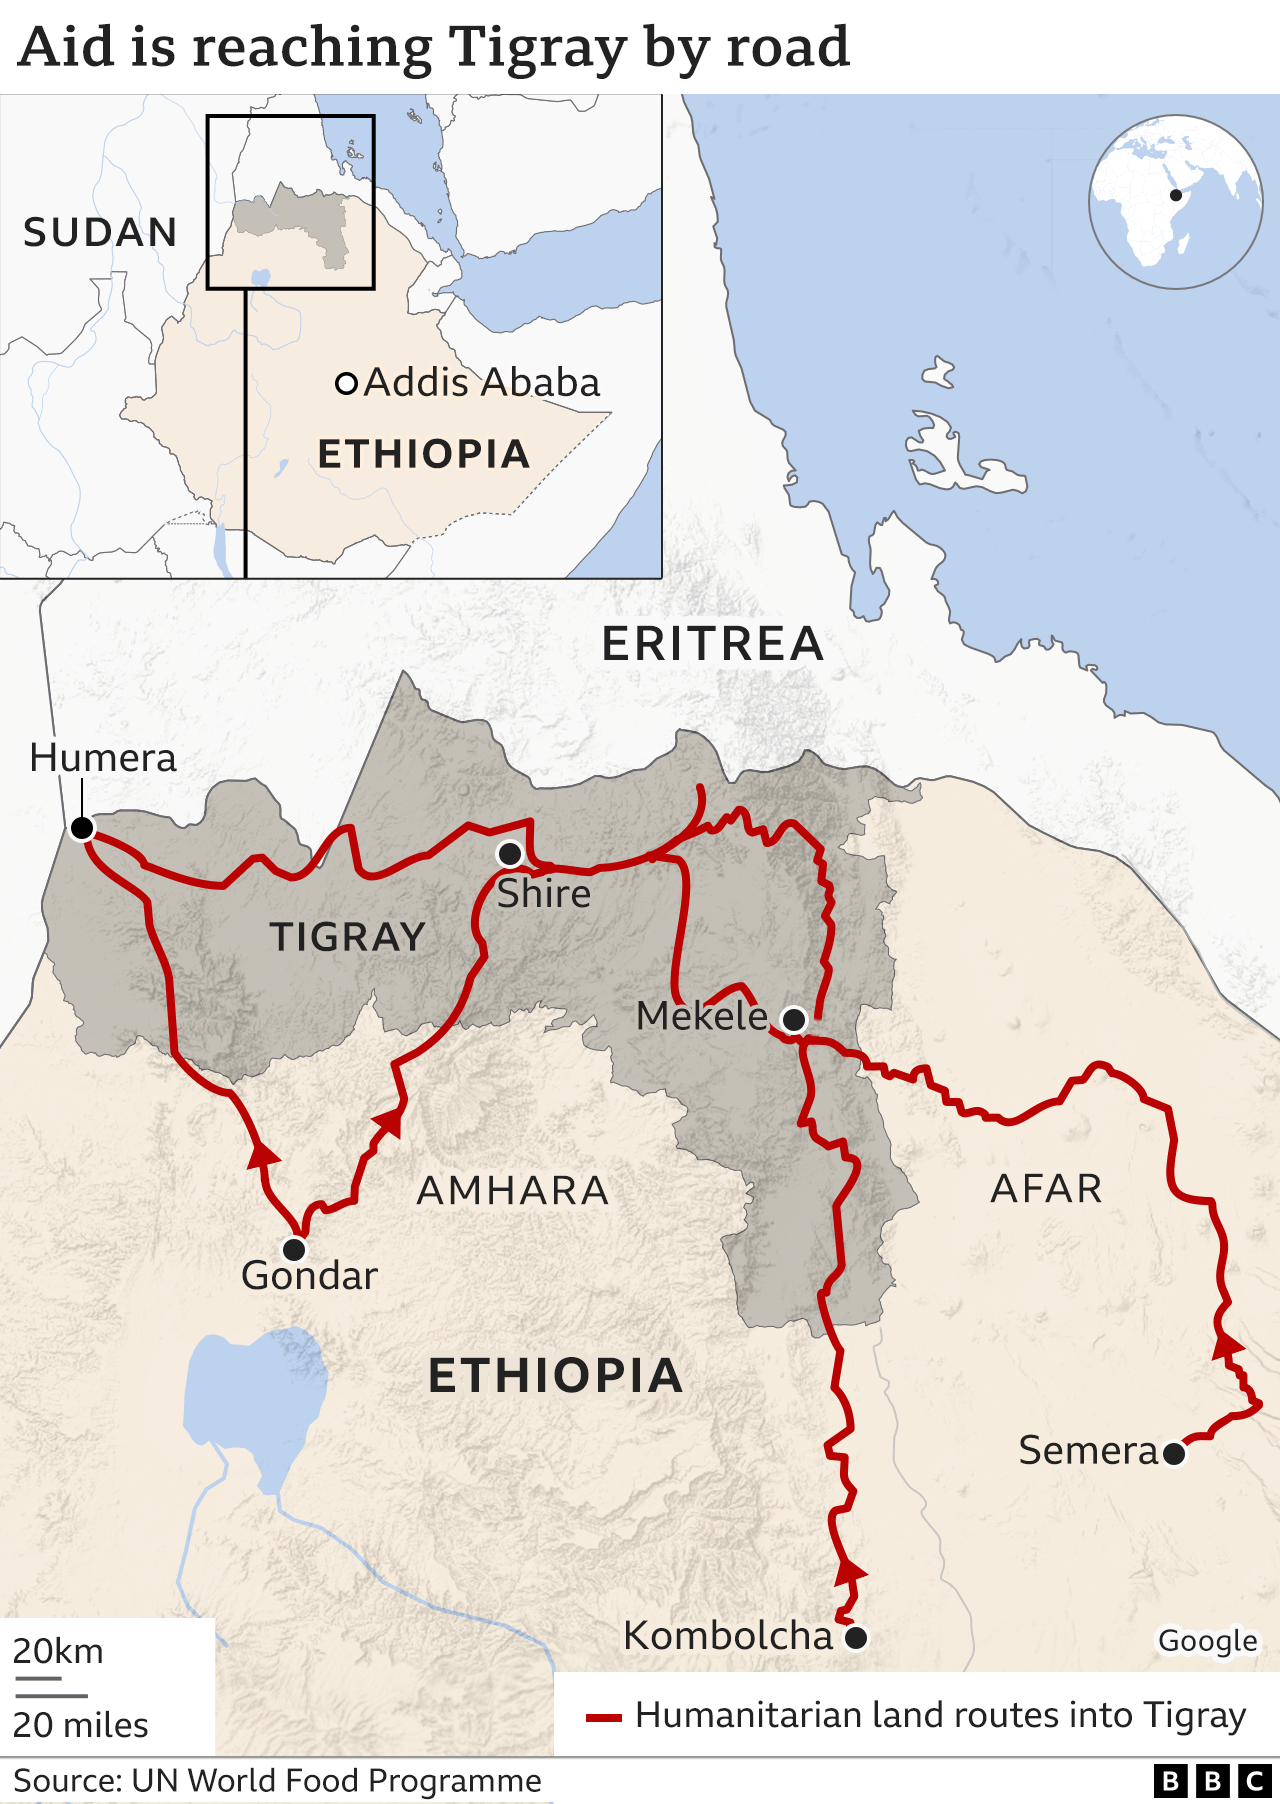 Map of Ethiopia showing humanitarian road routes into Tigray